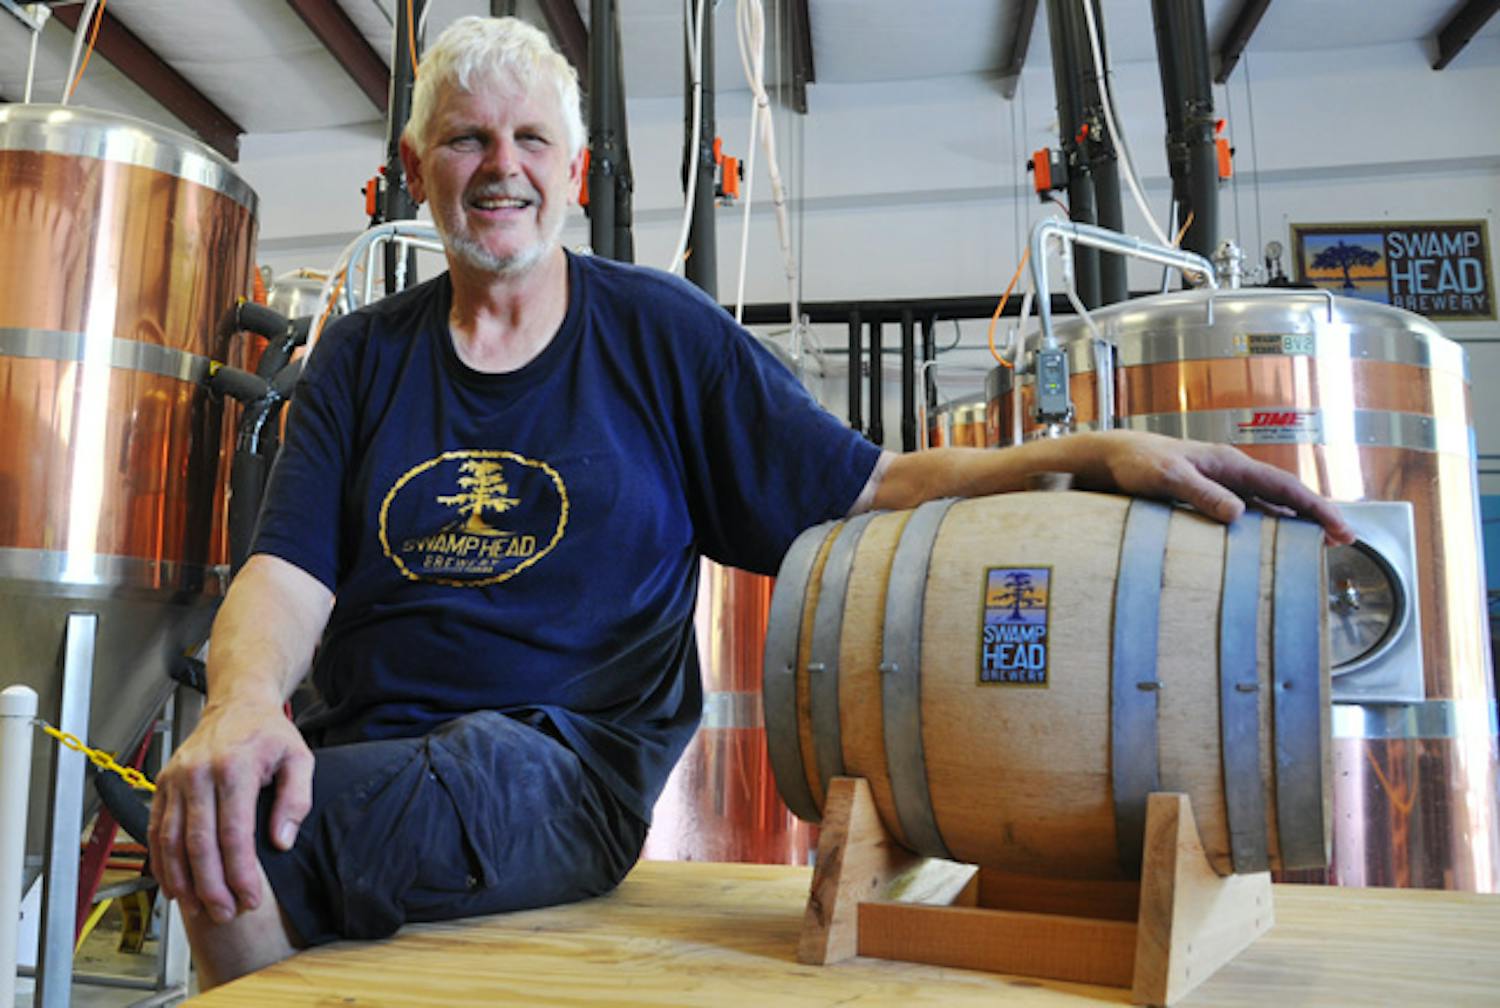 Head brewer Craig Birkmaier poses next to a cask of beer at Swamp Head Brewery on Thursday. He recovered part of a batch of beer Monday after power was cut for more than an hour.